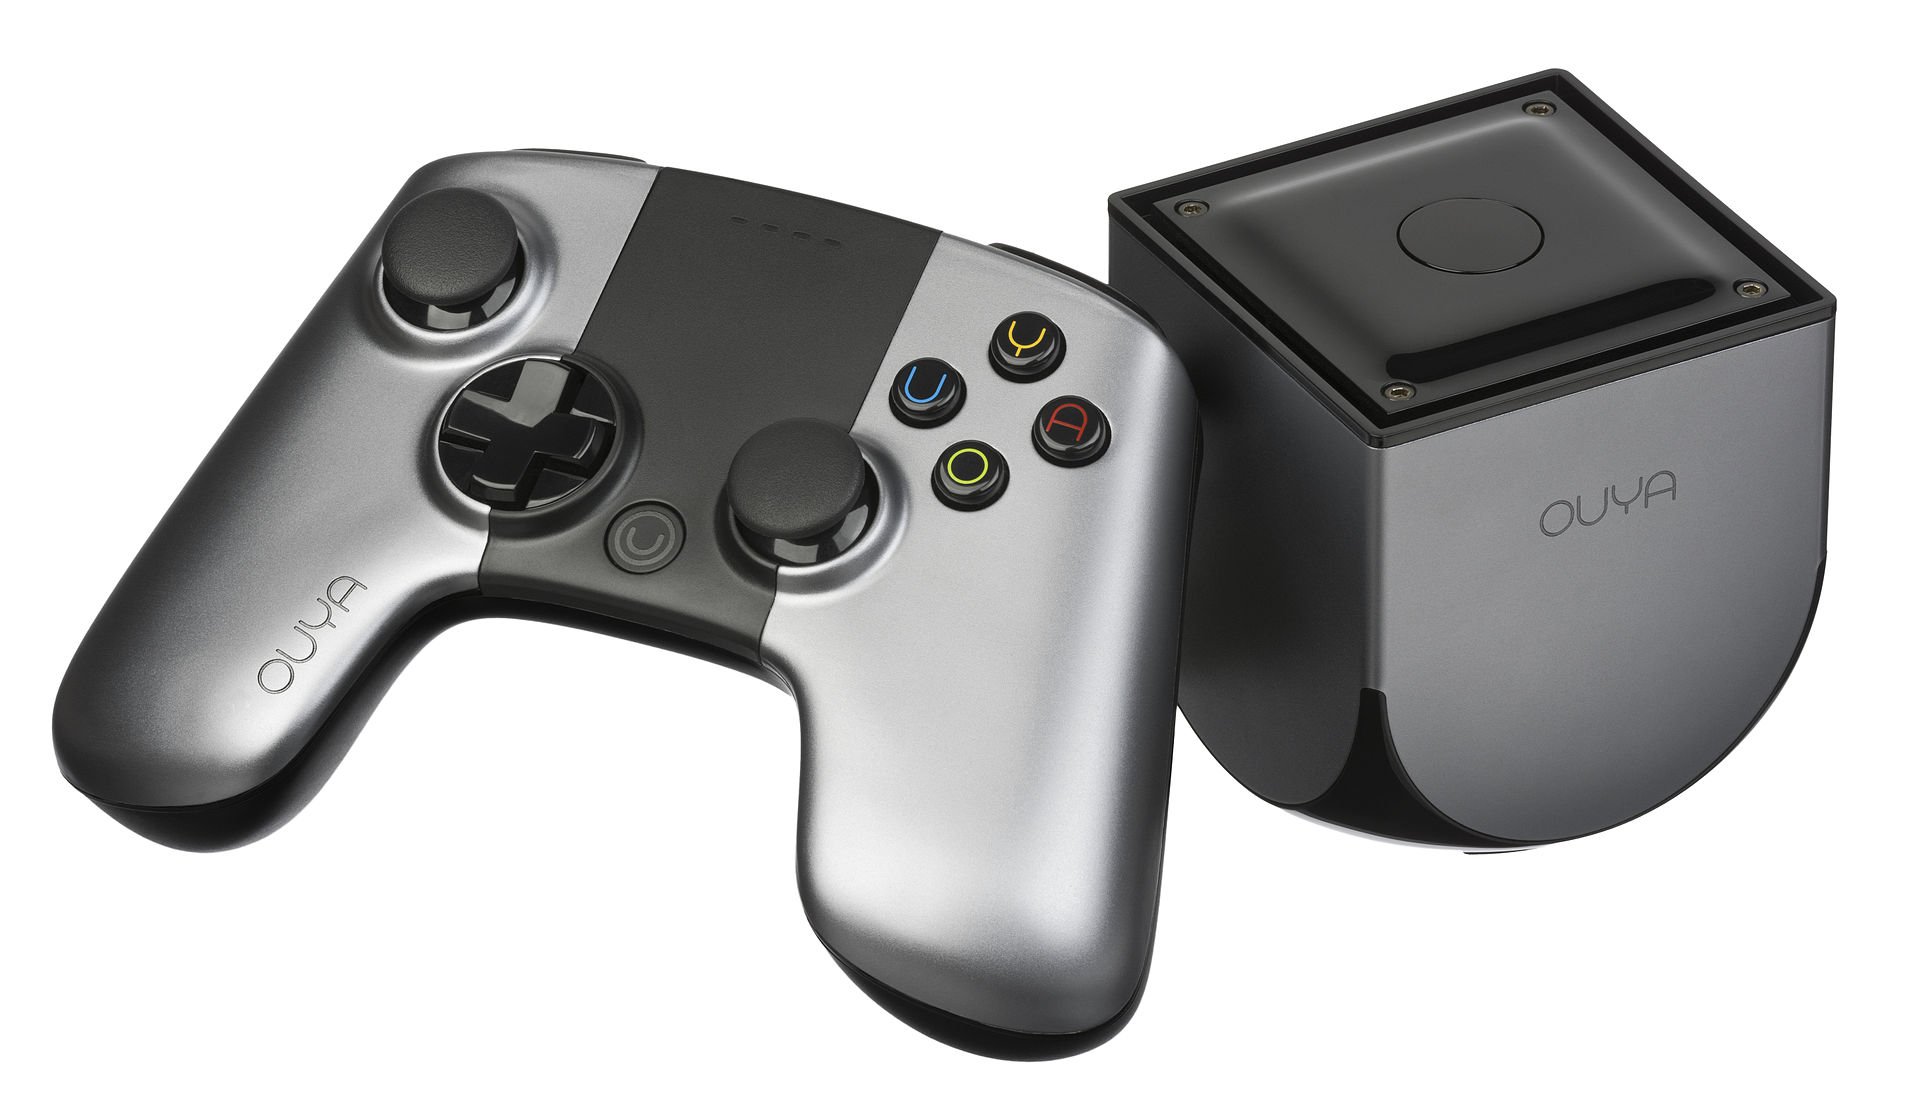 The Ouya console, originally released in 2013, and its controller. Photo: SCMP Pictures